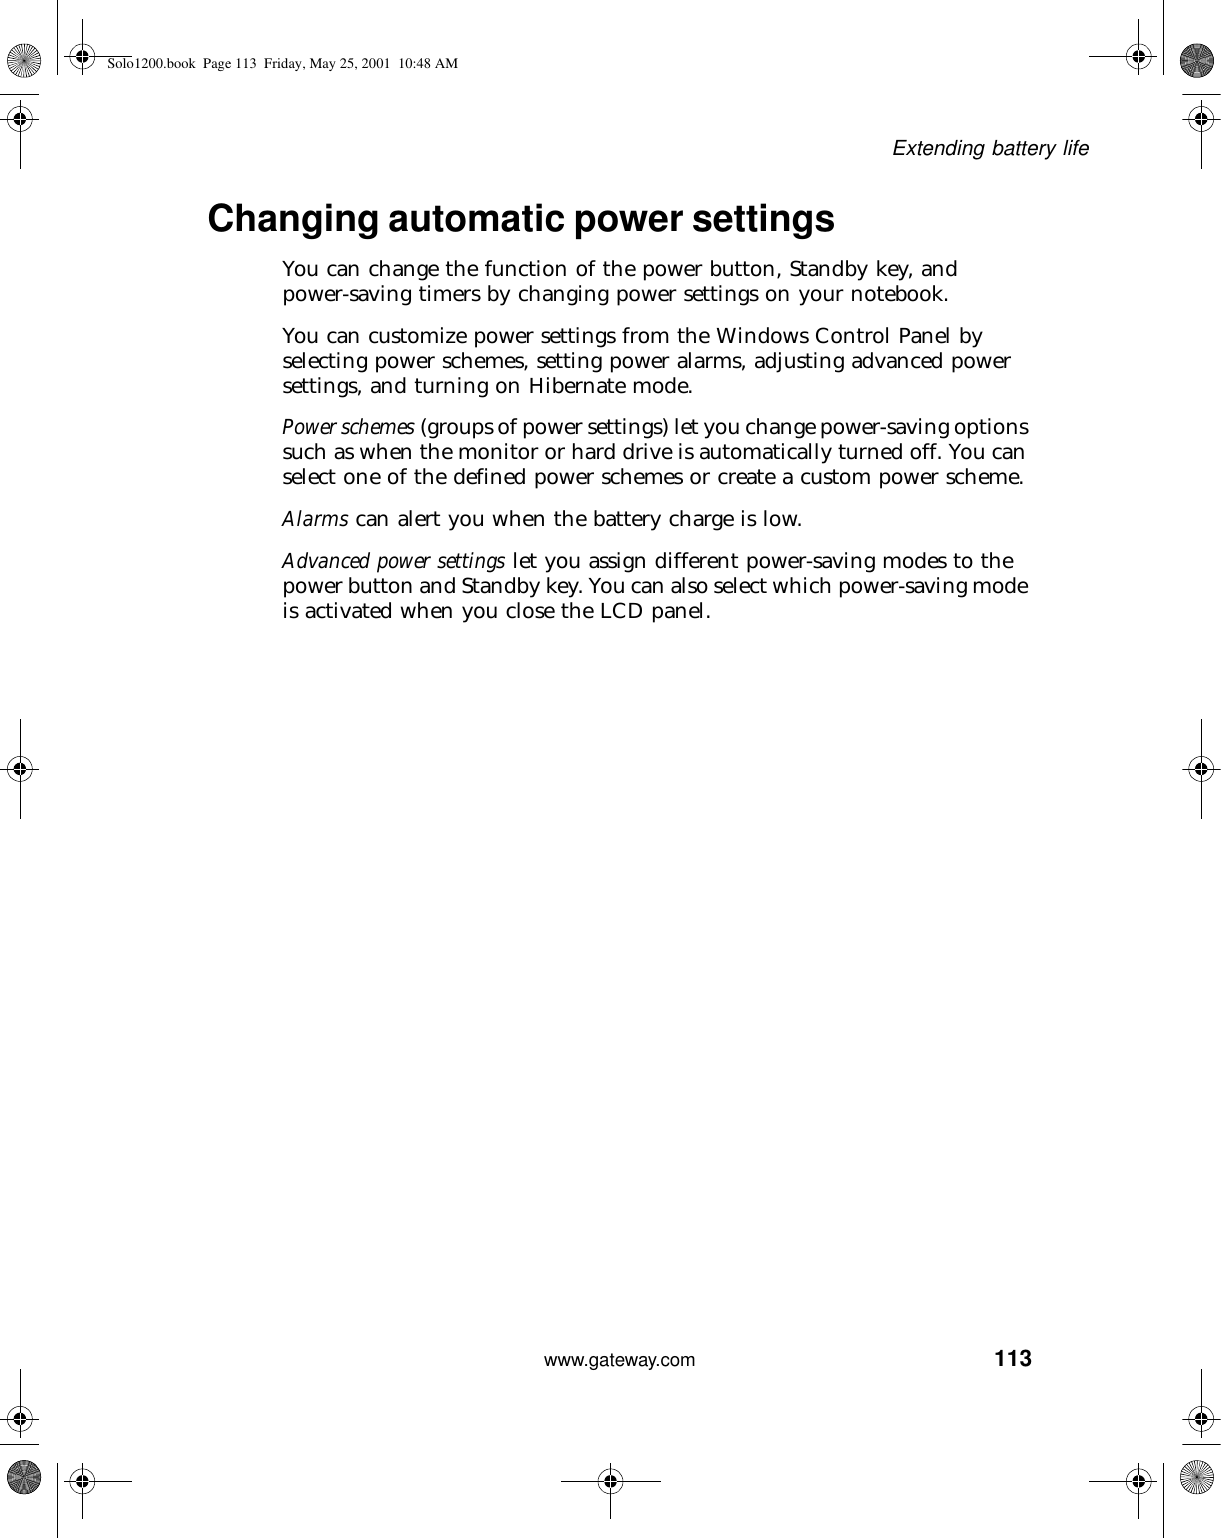 113Extending battery lifewww.gateway.comChanging automatic power settingsYou can change the function of the power button, Standby key, and power-saving timers by changing power settings on your notebook.You can customize power settings from the Windows Control Panel by selecting power schemes, setting power alarms, adjusting advanced power settings, and turning on Hibernate mode.Power schemes (groups of power settings) let you change power-saving options such as when the monitor or hard drive is automatically turned off. You can select one of the defined power schemes or create a custom power scheme.Alarms can alert you when the battery charge is low.Advanced power settings let you assign different power-saving modes to the power button and Standby key. You can also select which power-saving mode is activated when you close the LCD panel.Solo1200.book Page 113 Friday, May 25, 2001 10:48 AM